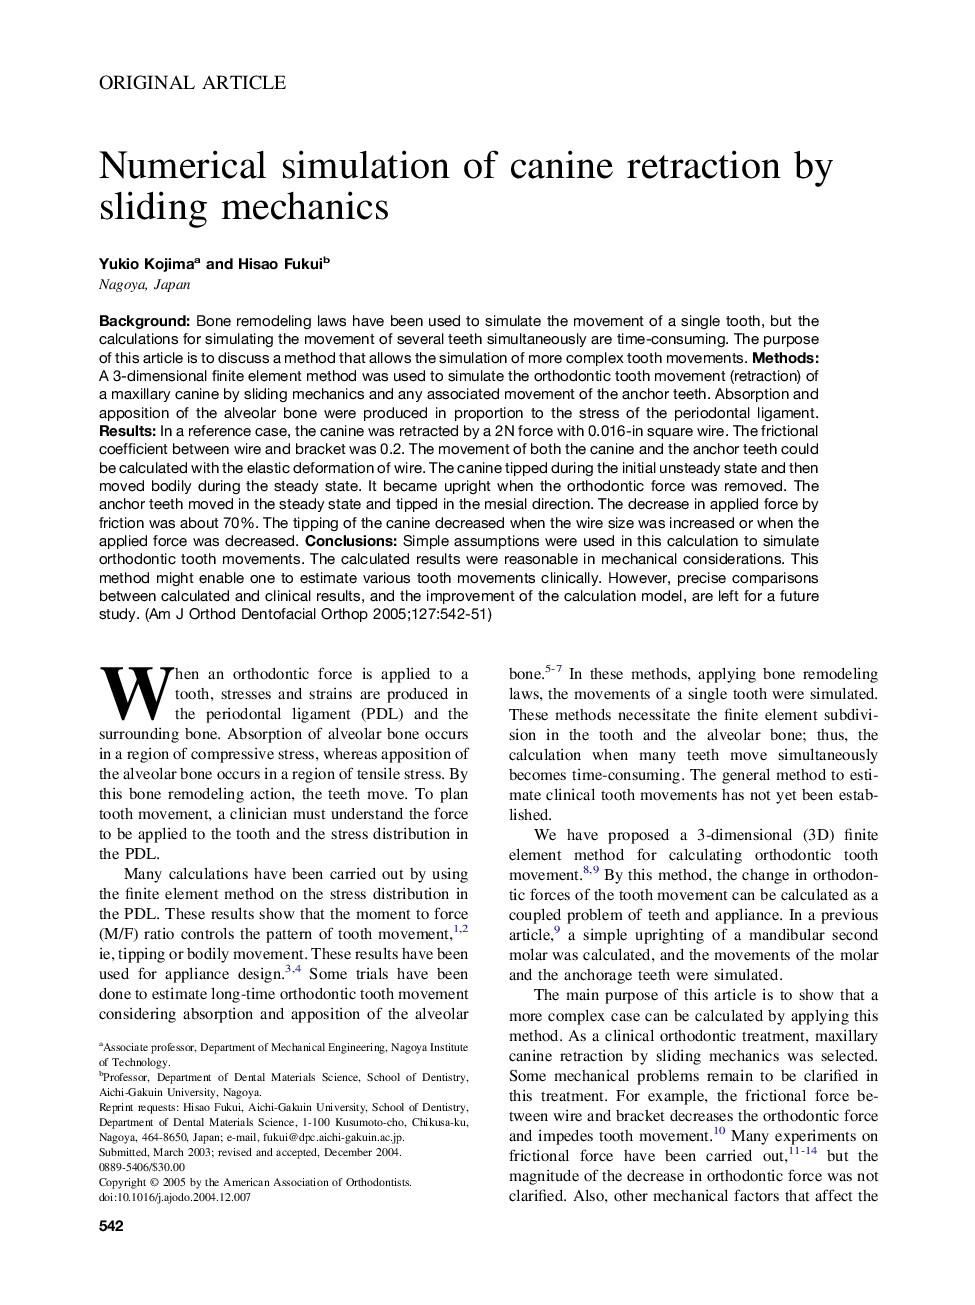 Numerical simulation of canine retraction by sliding mechanics